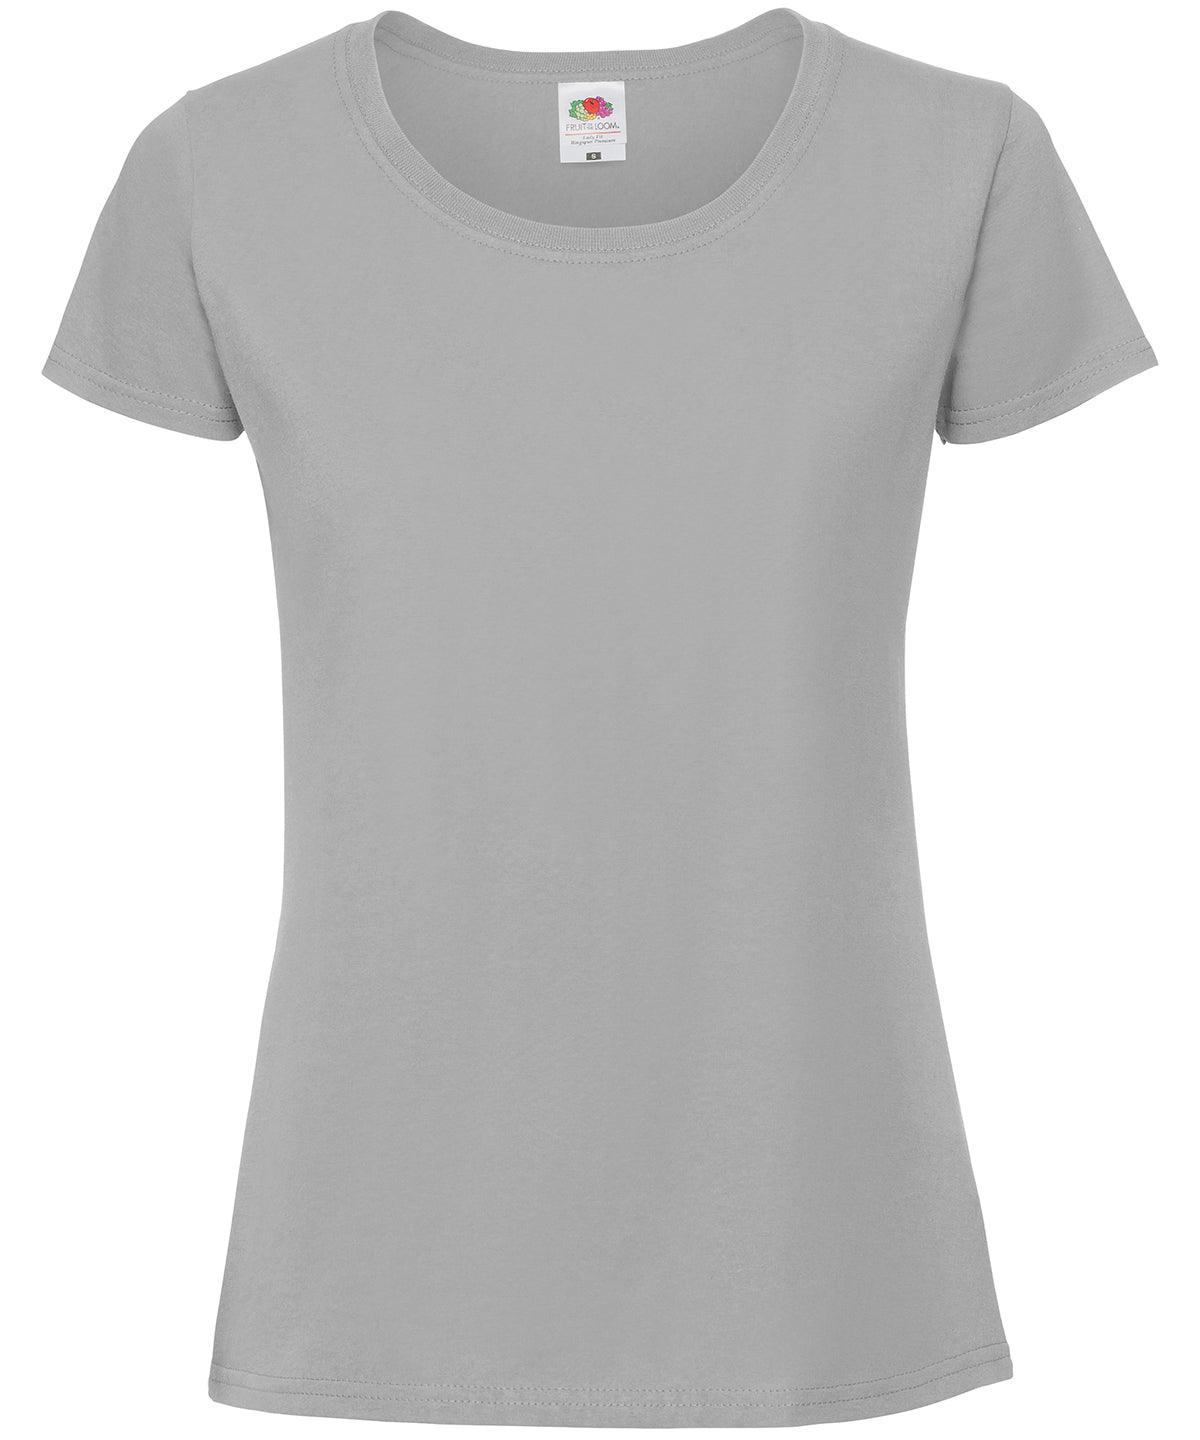 Zinc - Lady-fit ringspun premium t-shirt T-Shirts Fruit of the Loom New Colours for 2023, Safe to wash at 60 degrees, T-Shirts & Vests, Tees safe to wash at 60 degrees Schoolwear Centres